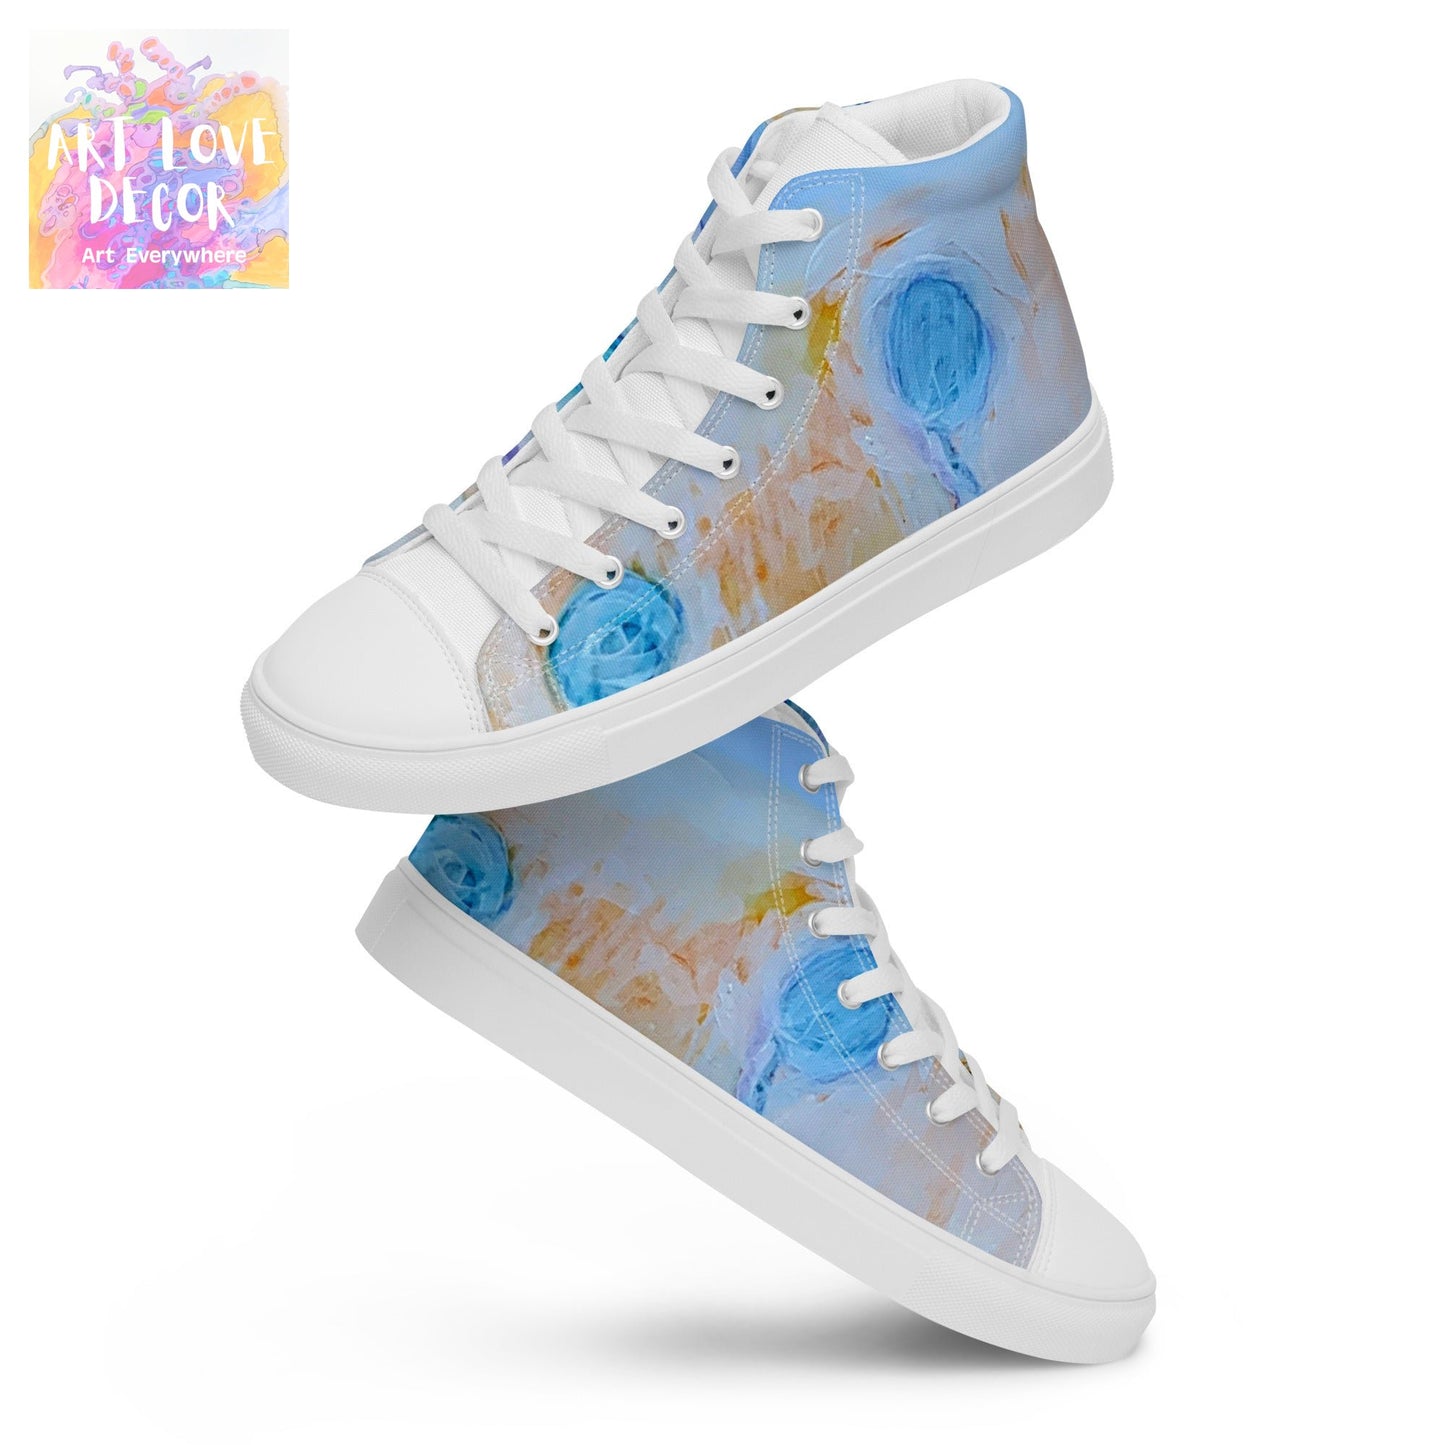 Softly Women’s high top shoes